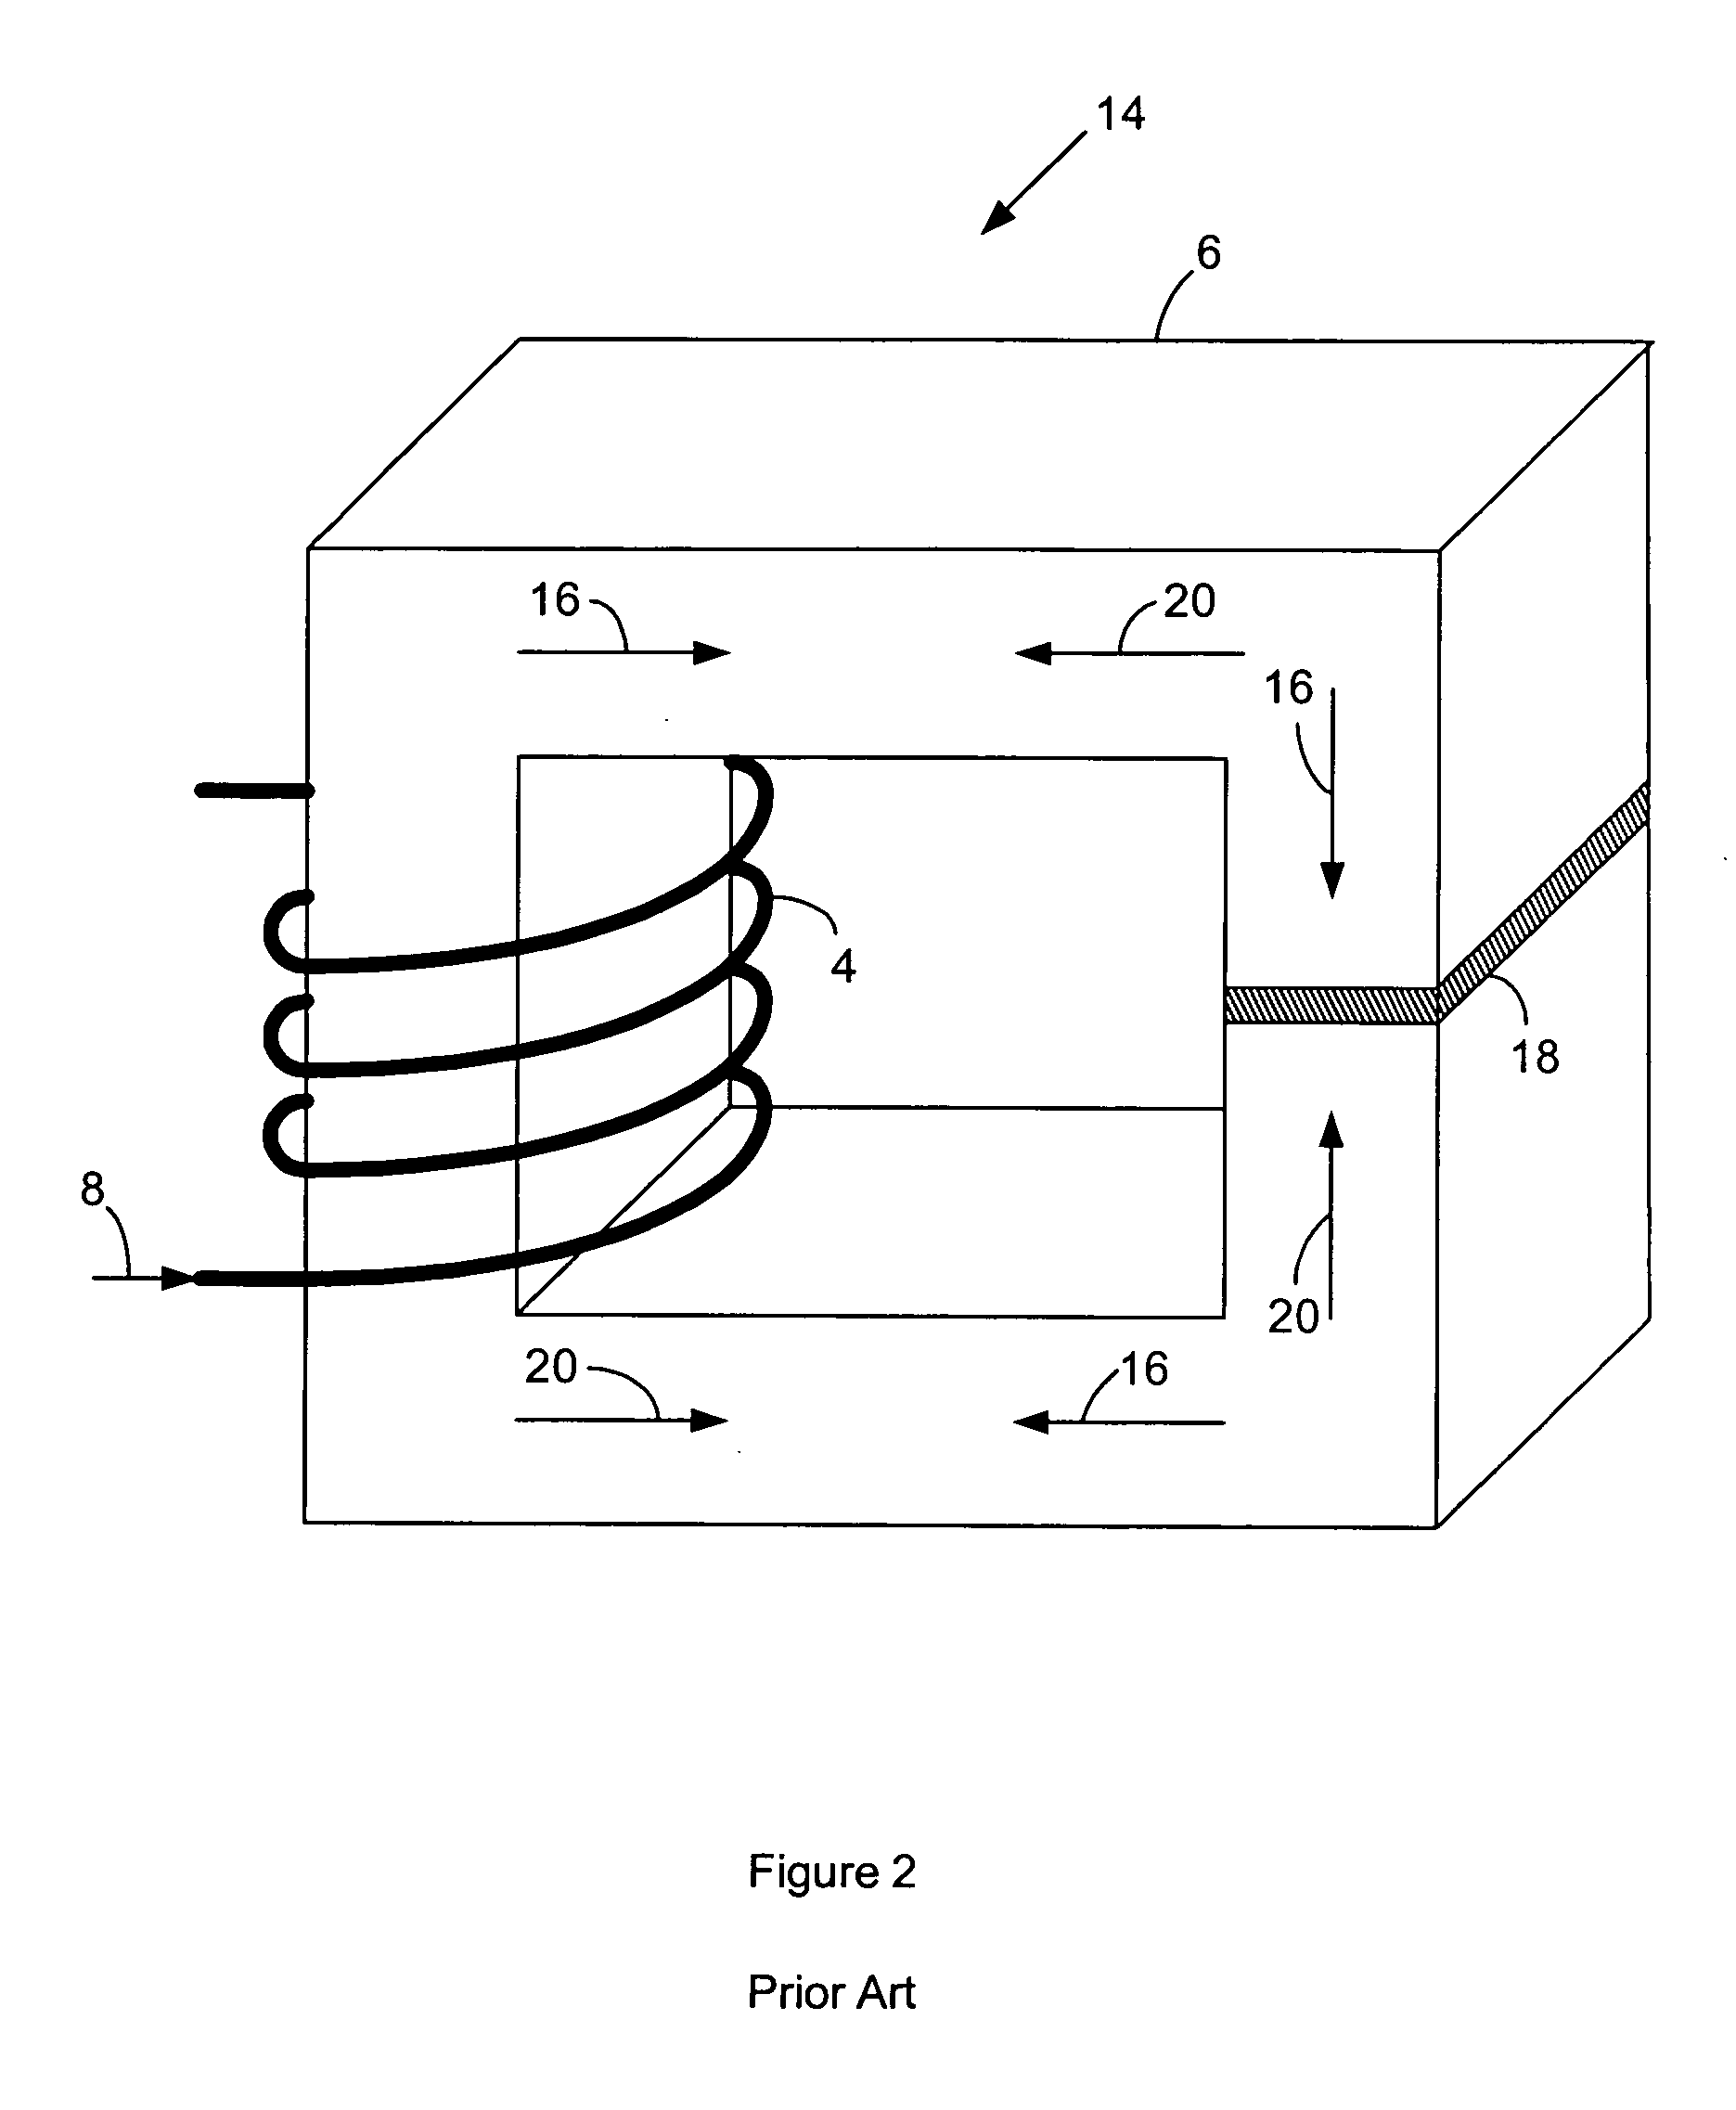 Direct current link inductor for power source filtration